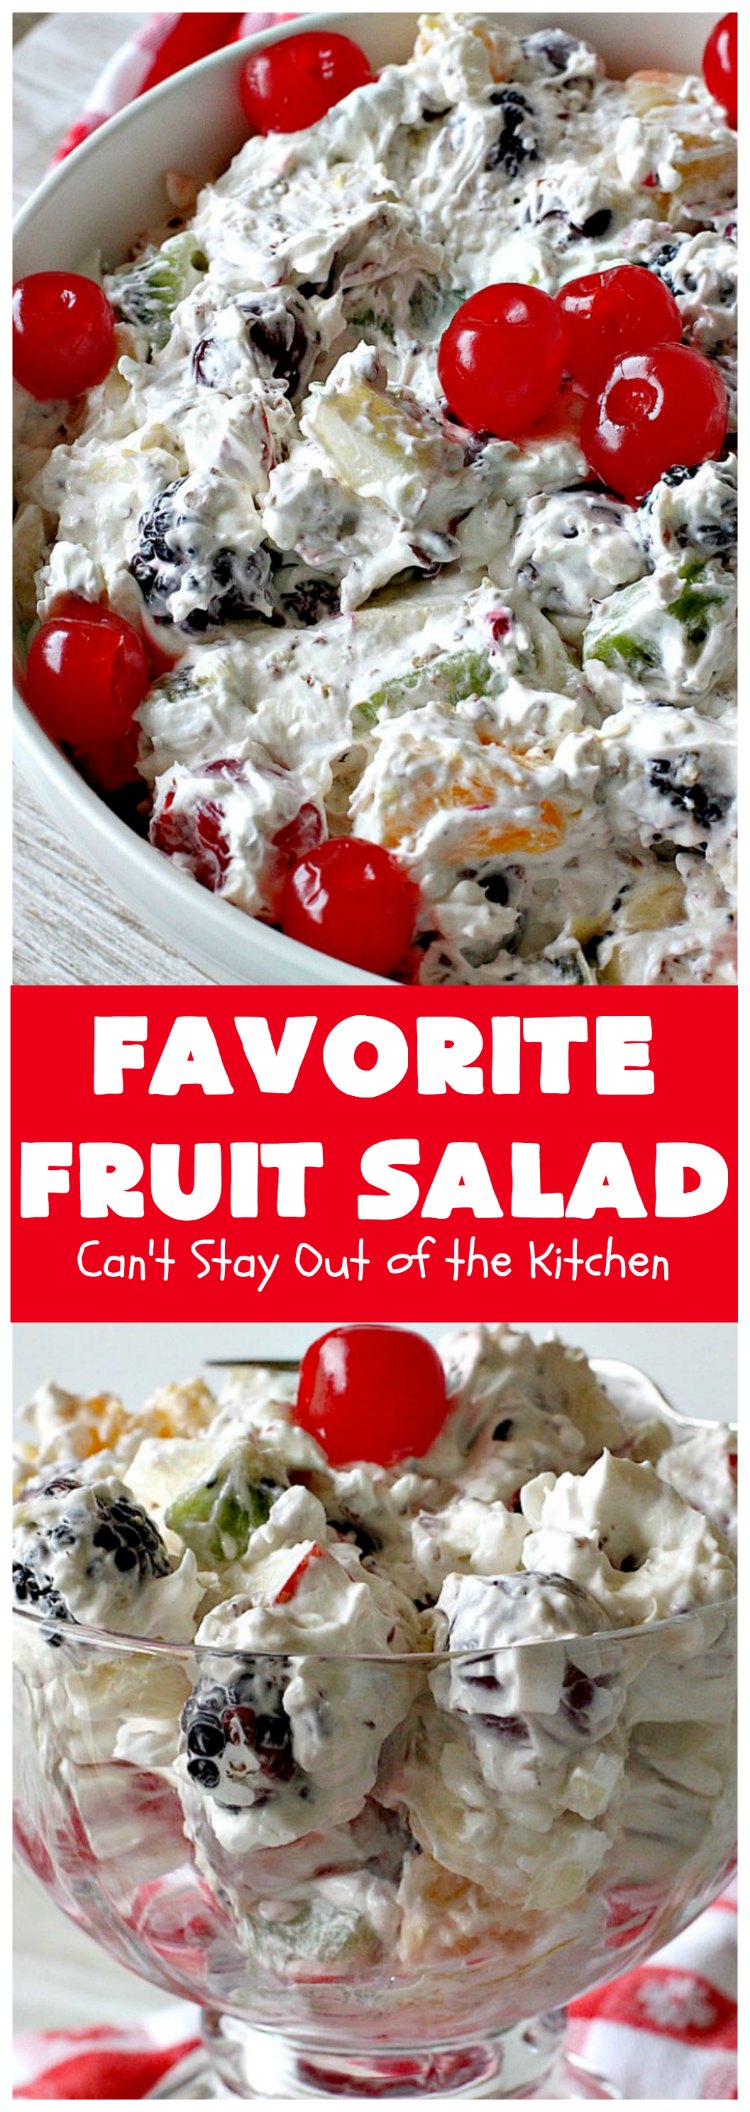 Favorite Fruit Salad | Can't Stay Out of the Kitchen